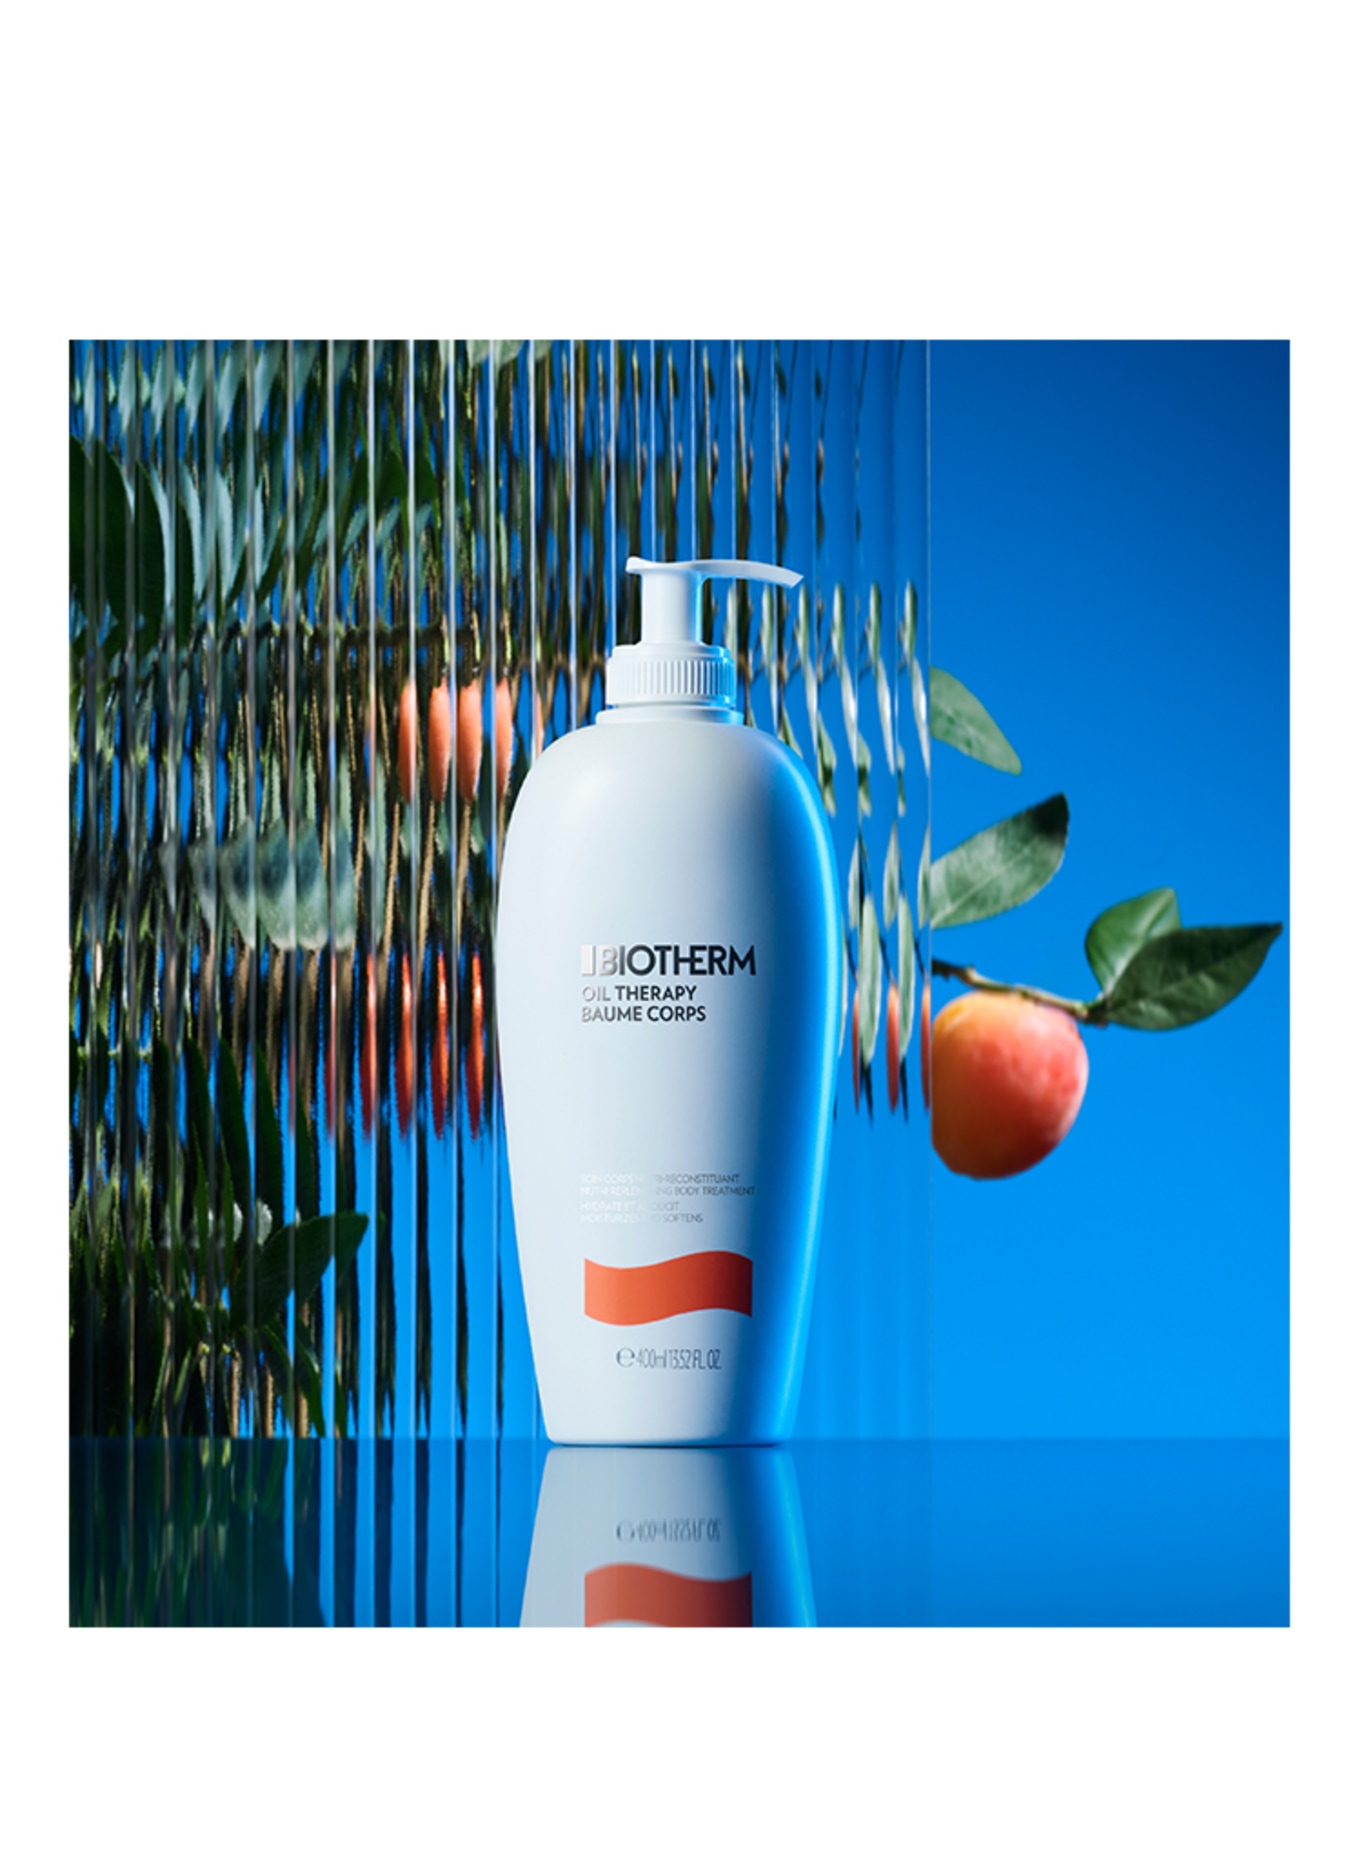 BIOTHERM OIL THERAPY BAUME CORPS (Obrázek 5)